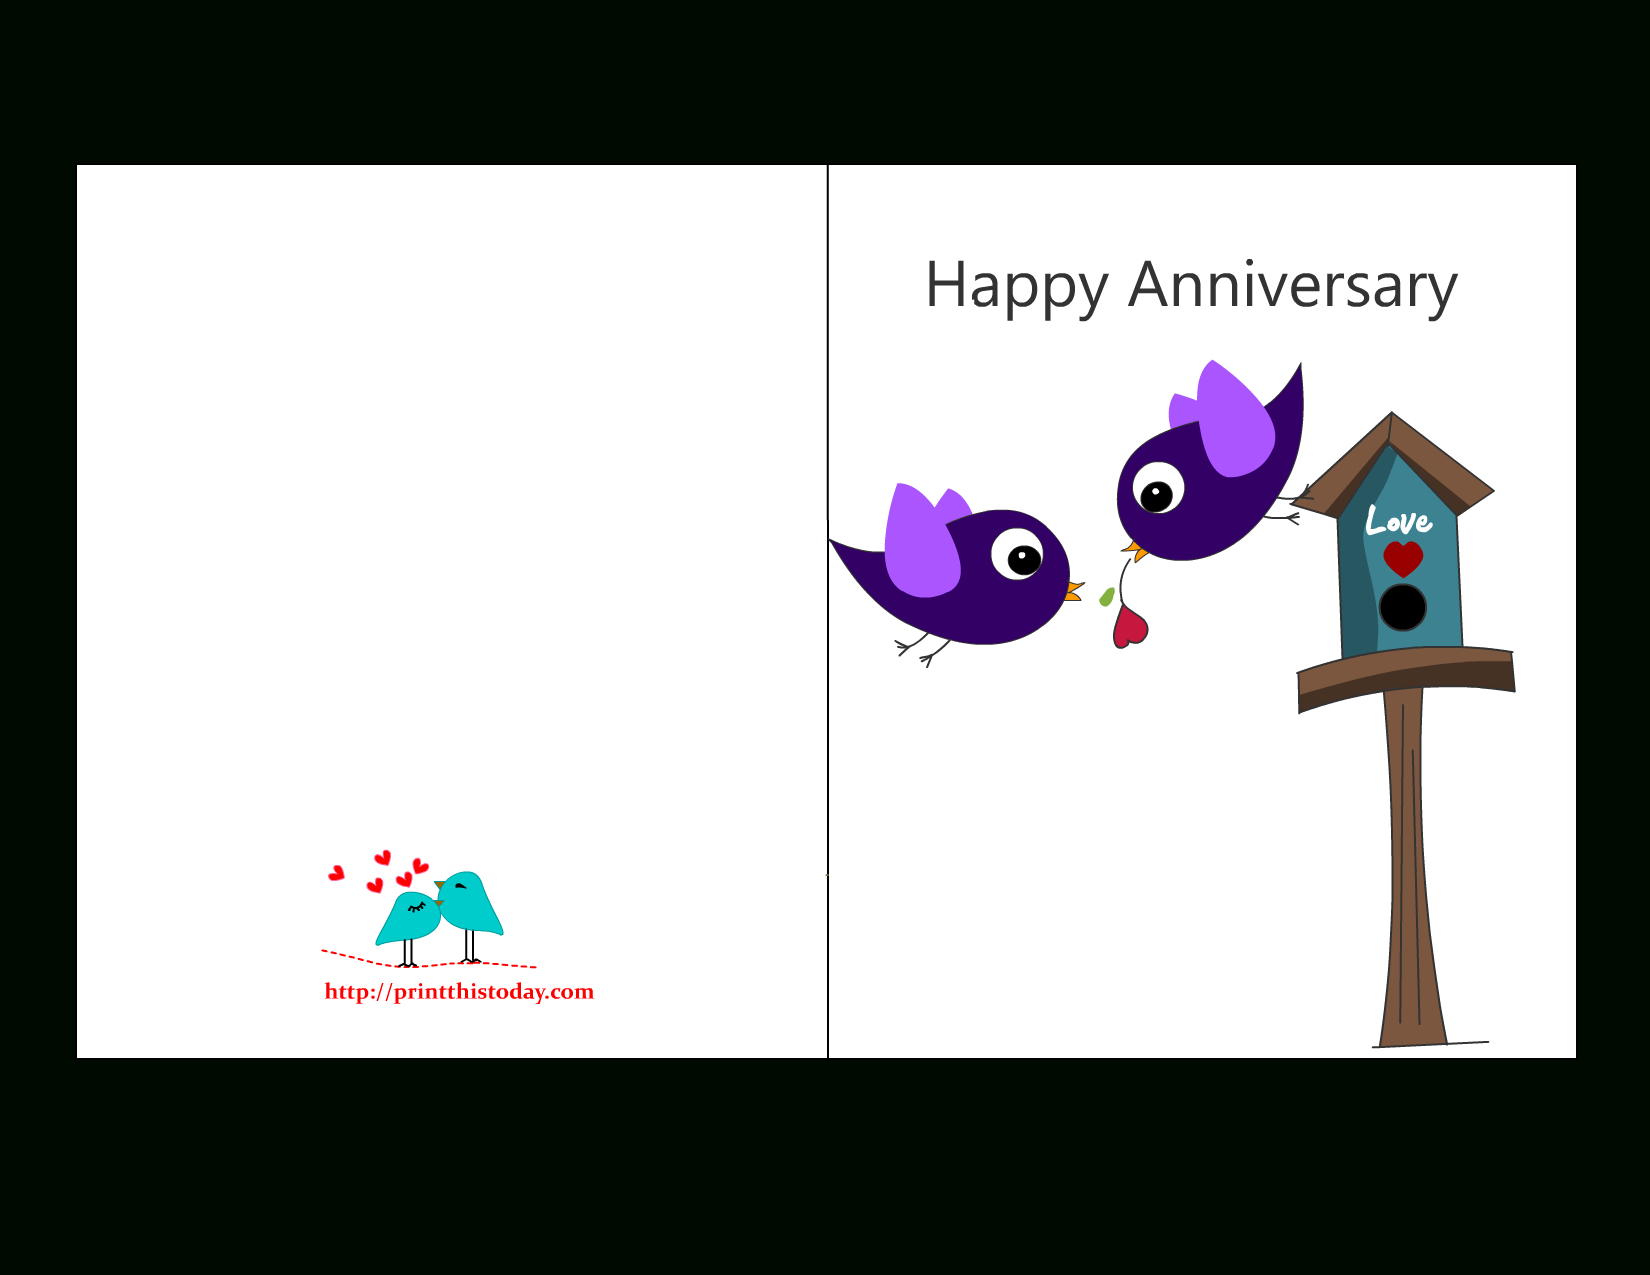 Free Printable Anniversary Cards intended for Free Printable Anniversary Cards